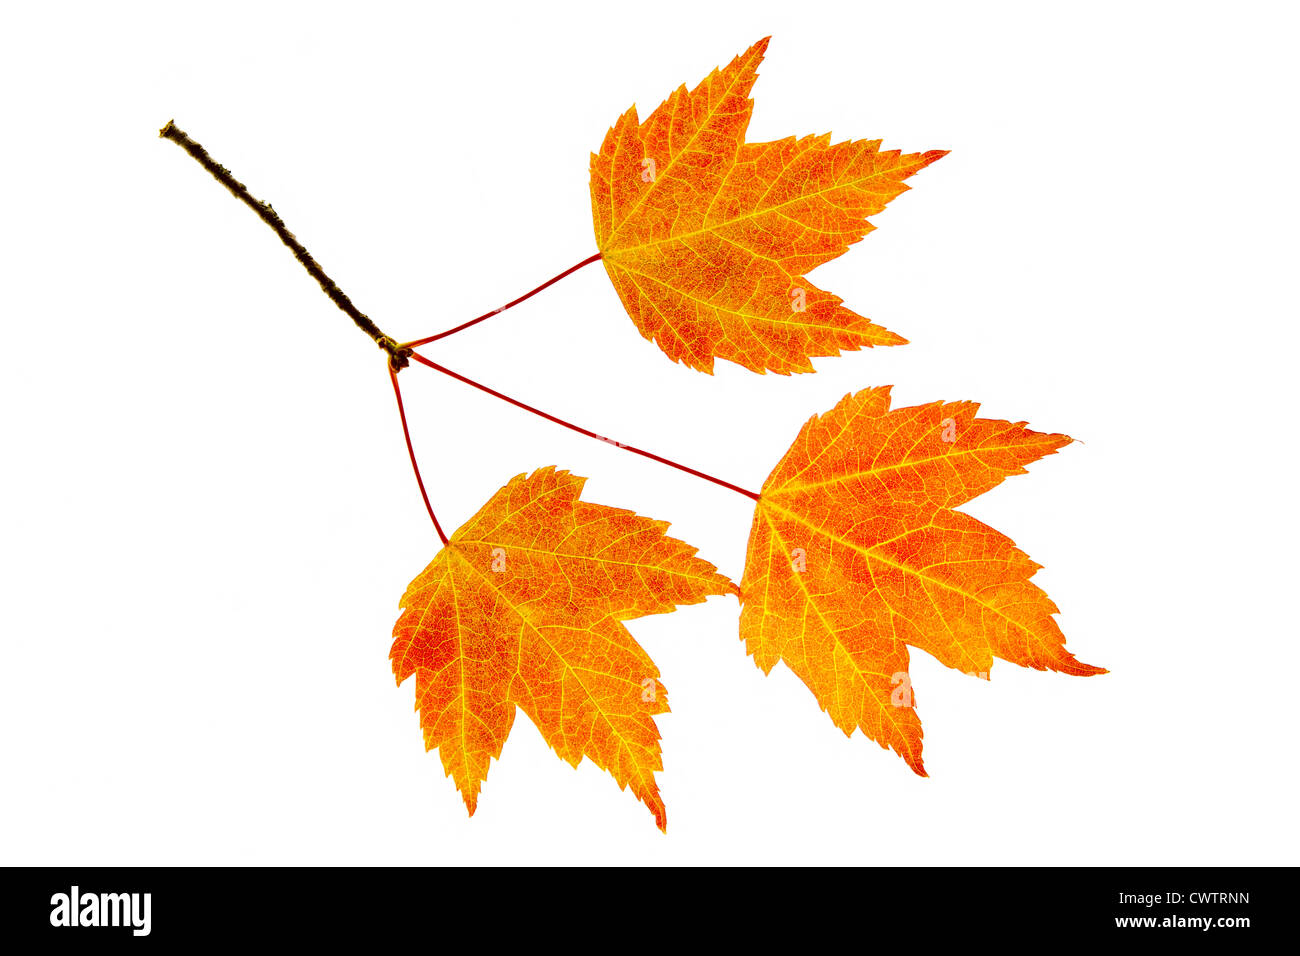 Fall Maple Leaves Trio on Branch Isolated on White Background Stock Photo